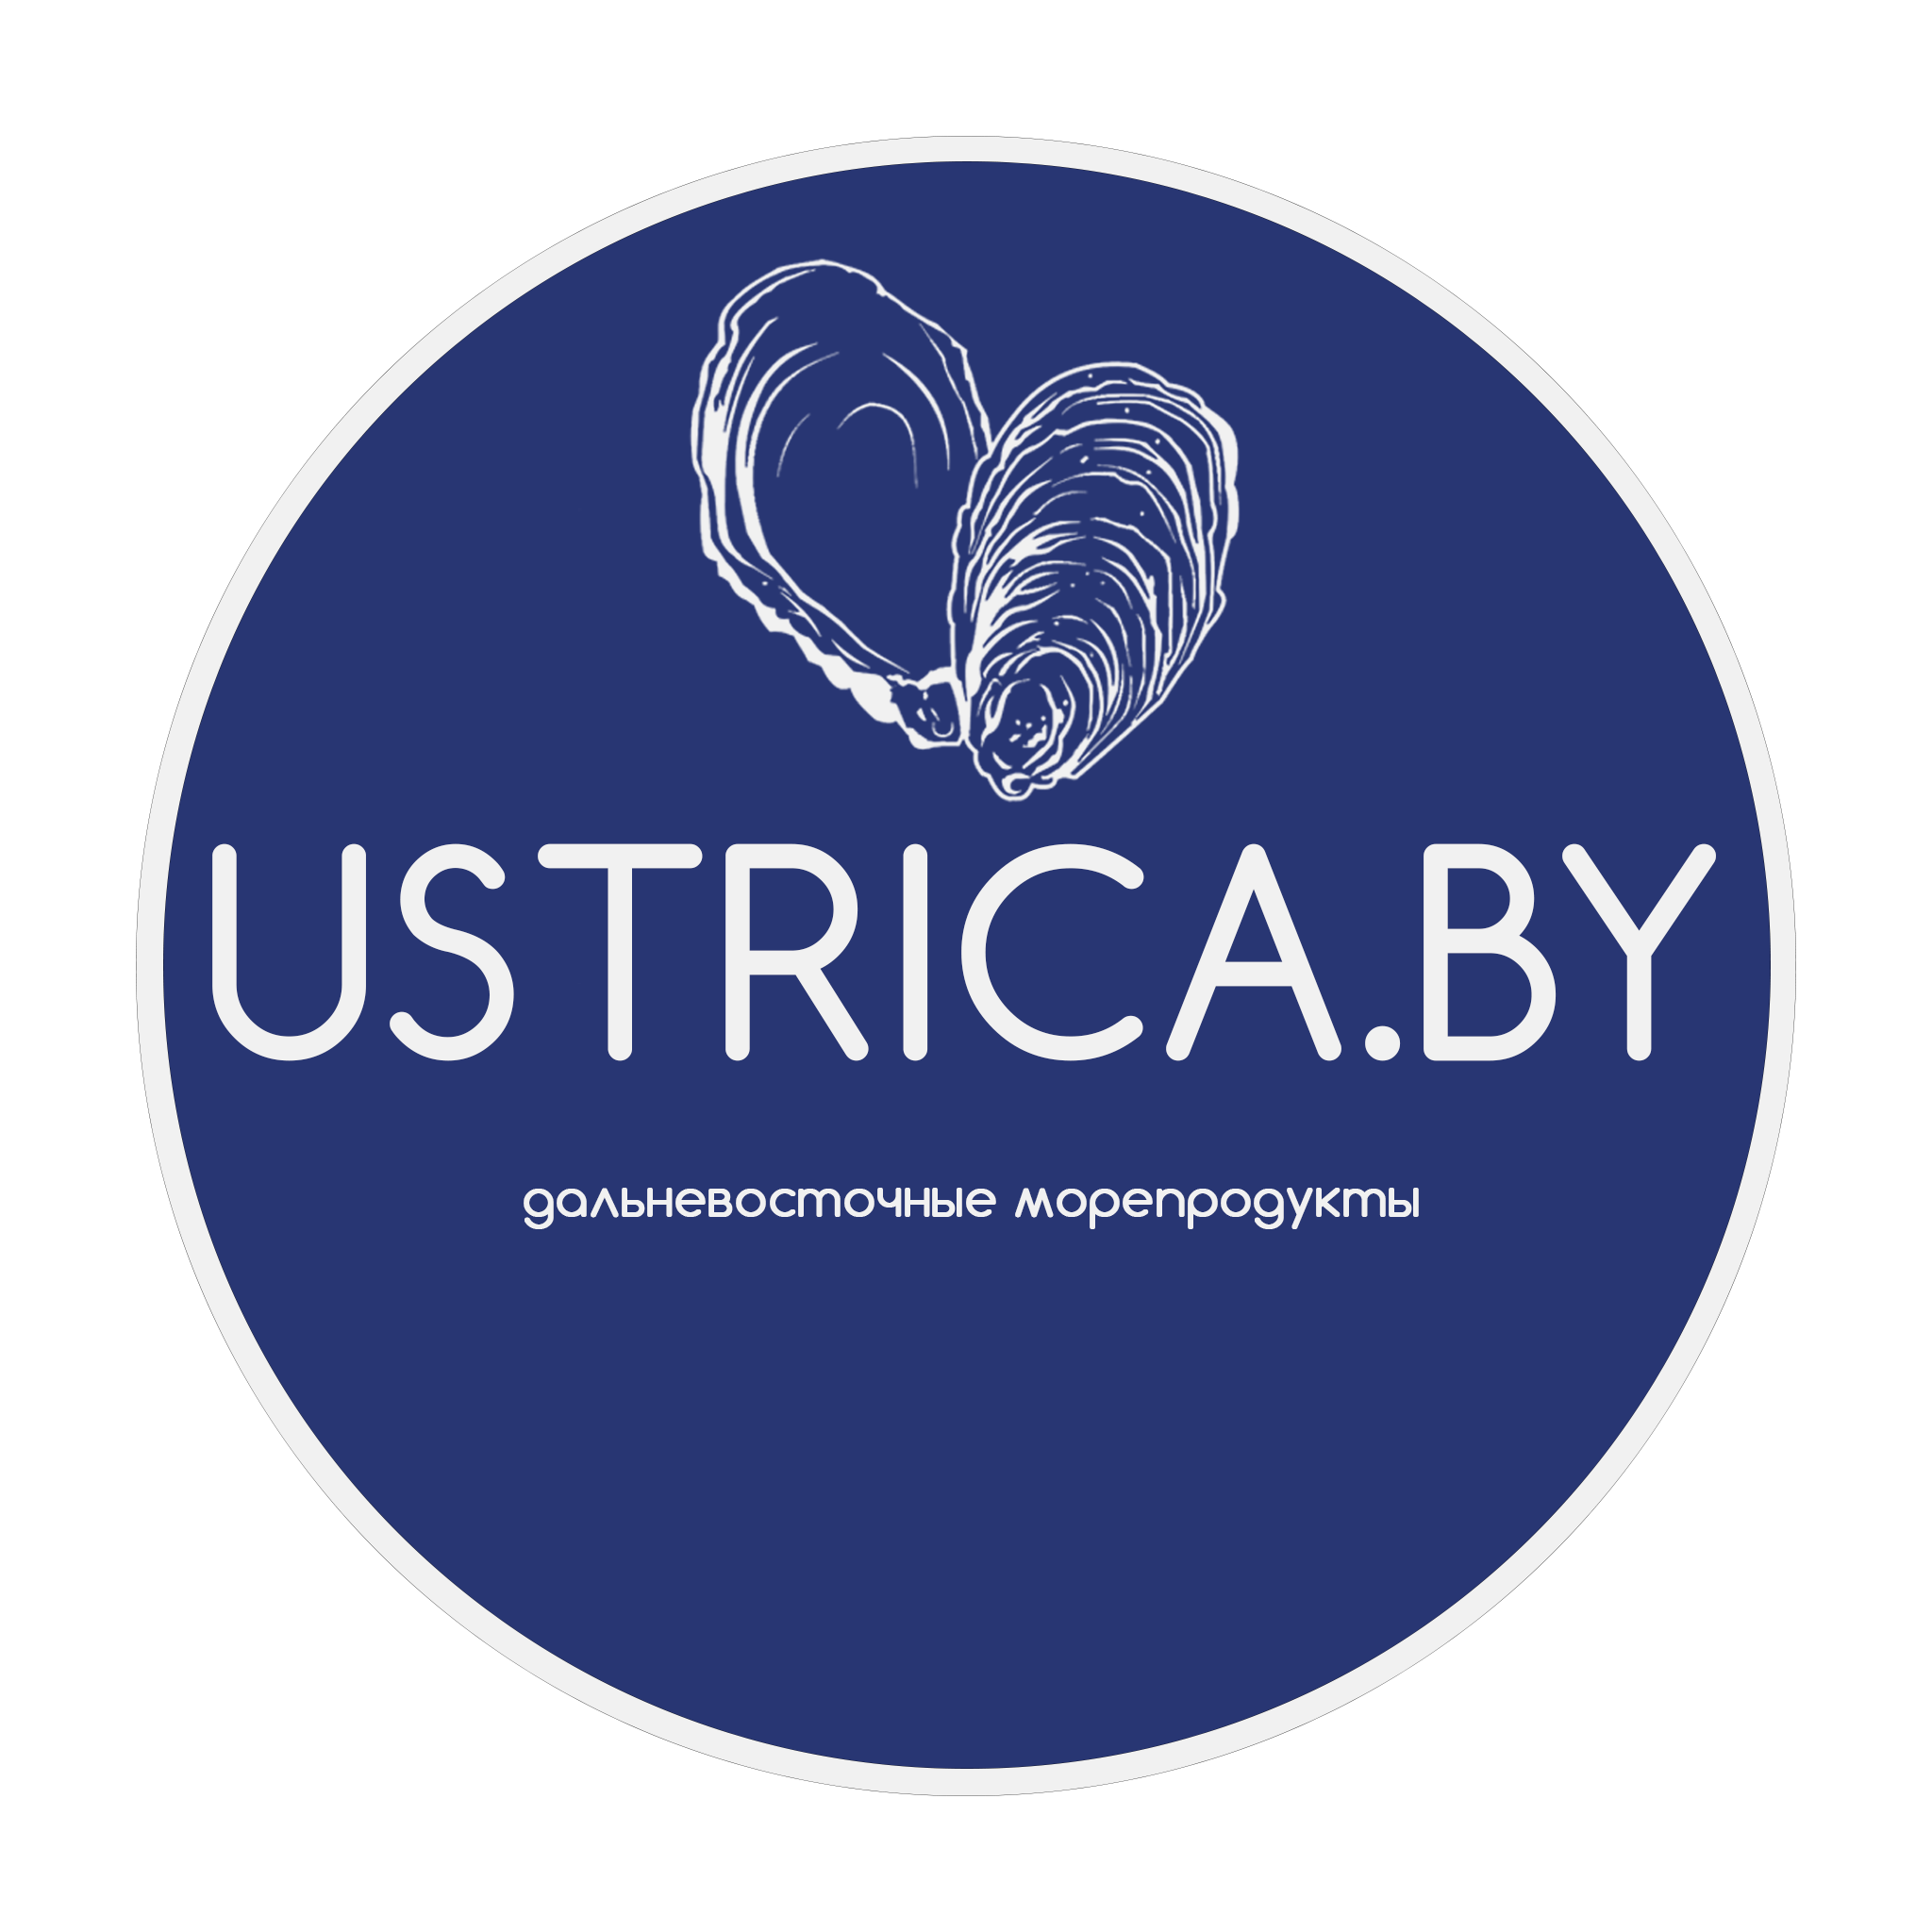 ustrica.by